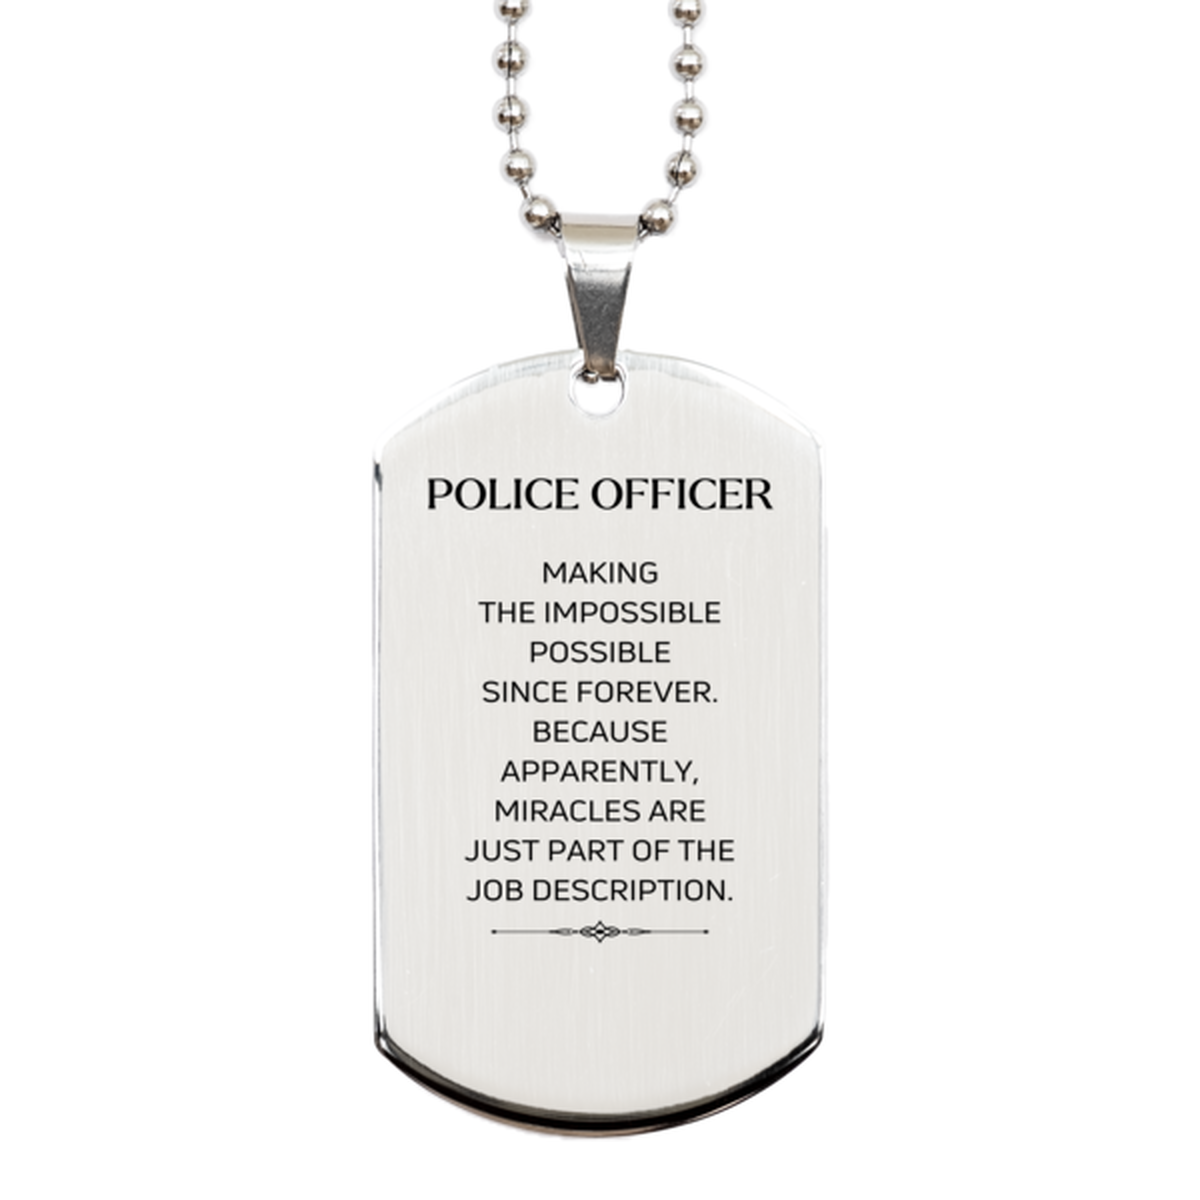 Funny Police Officer Gifts, Miracles are just part of the job description, Inspirational Birthday Silver Dog Tag For Police Officer, Men, Women, Coworkers, Friends, Boss